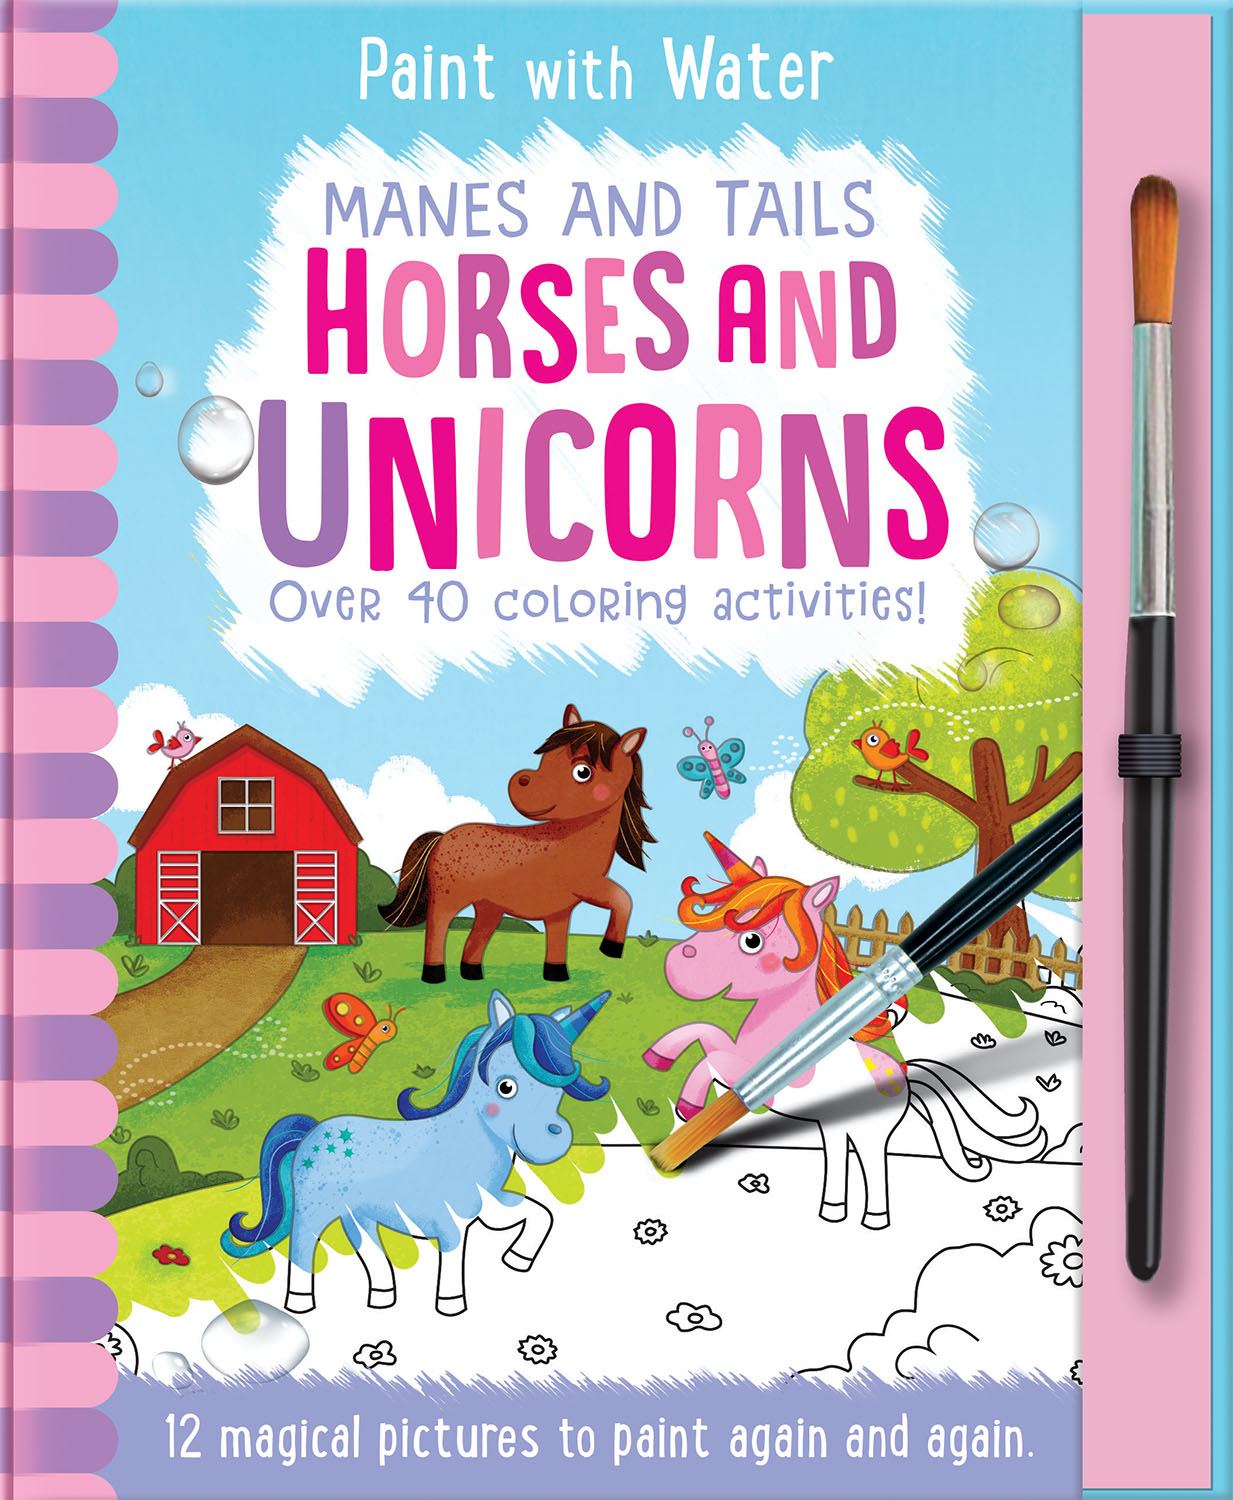 MANES AND TAILS - HORSES AND UNICORNS